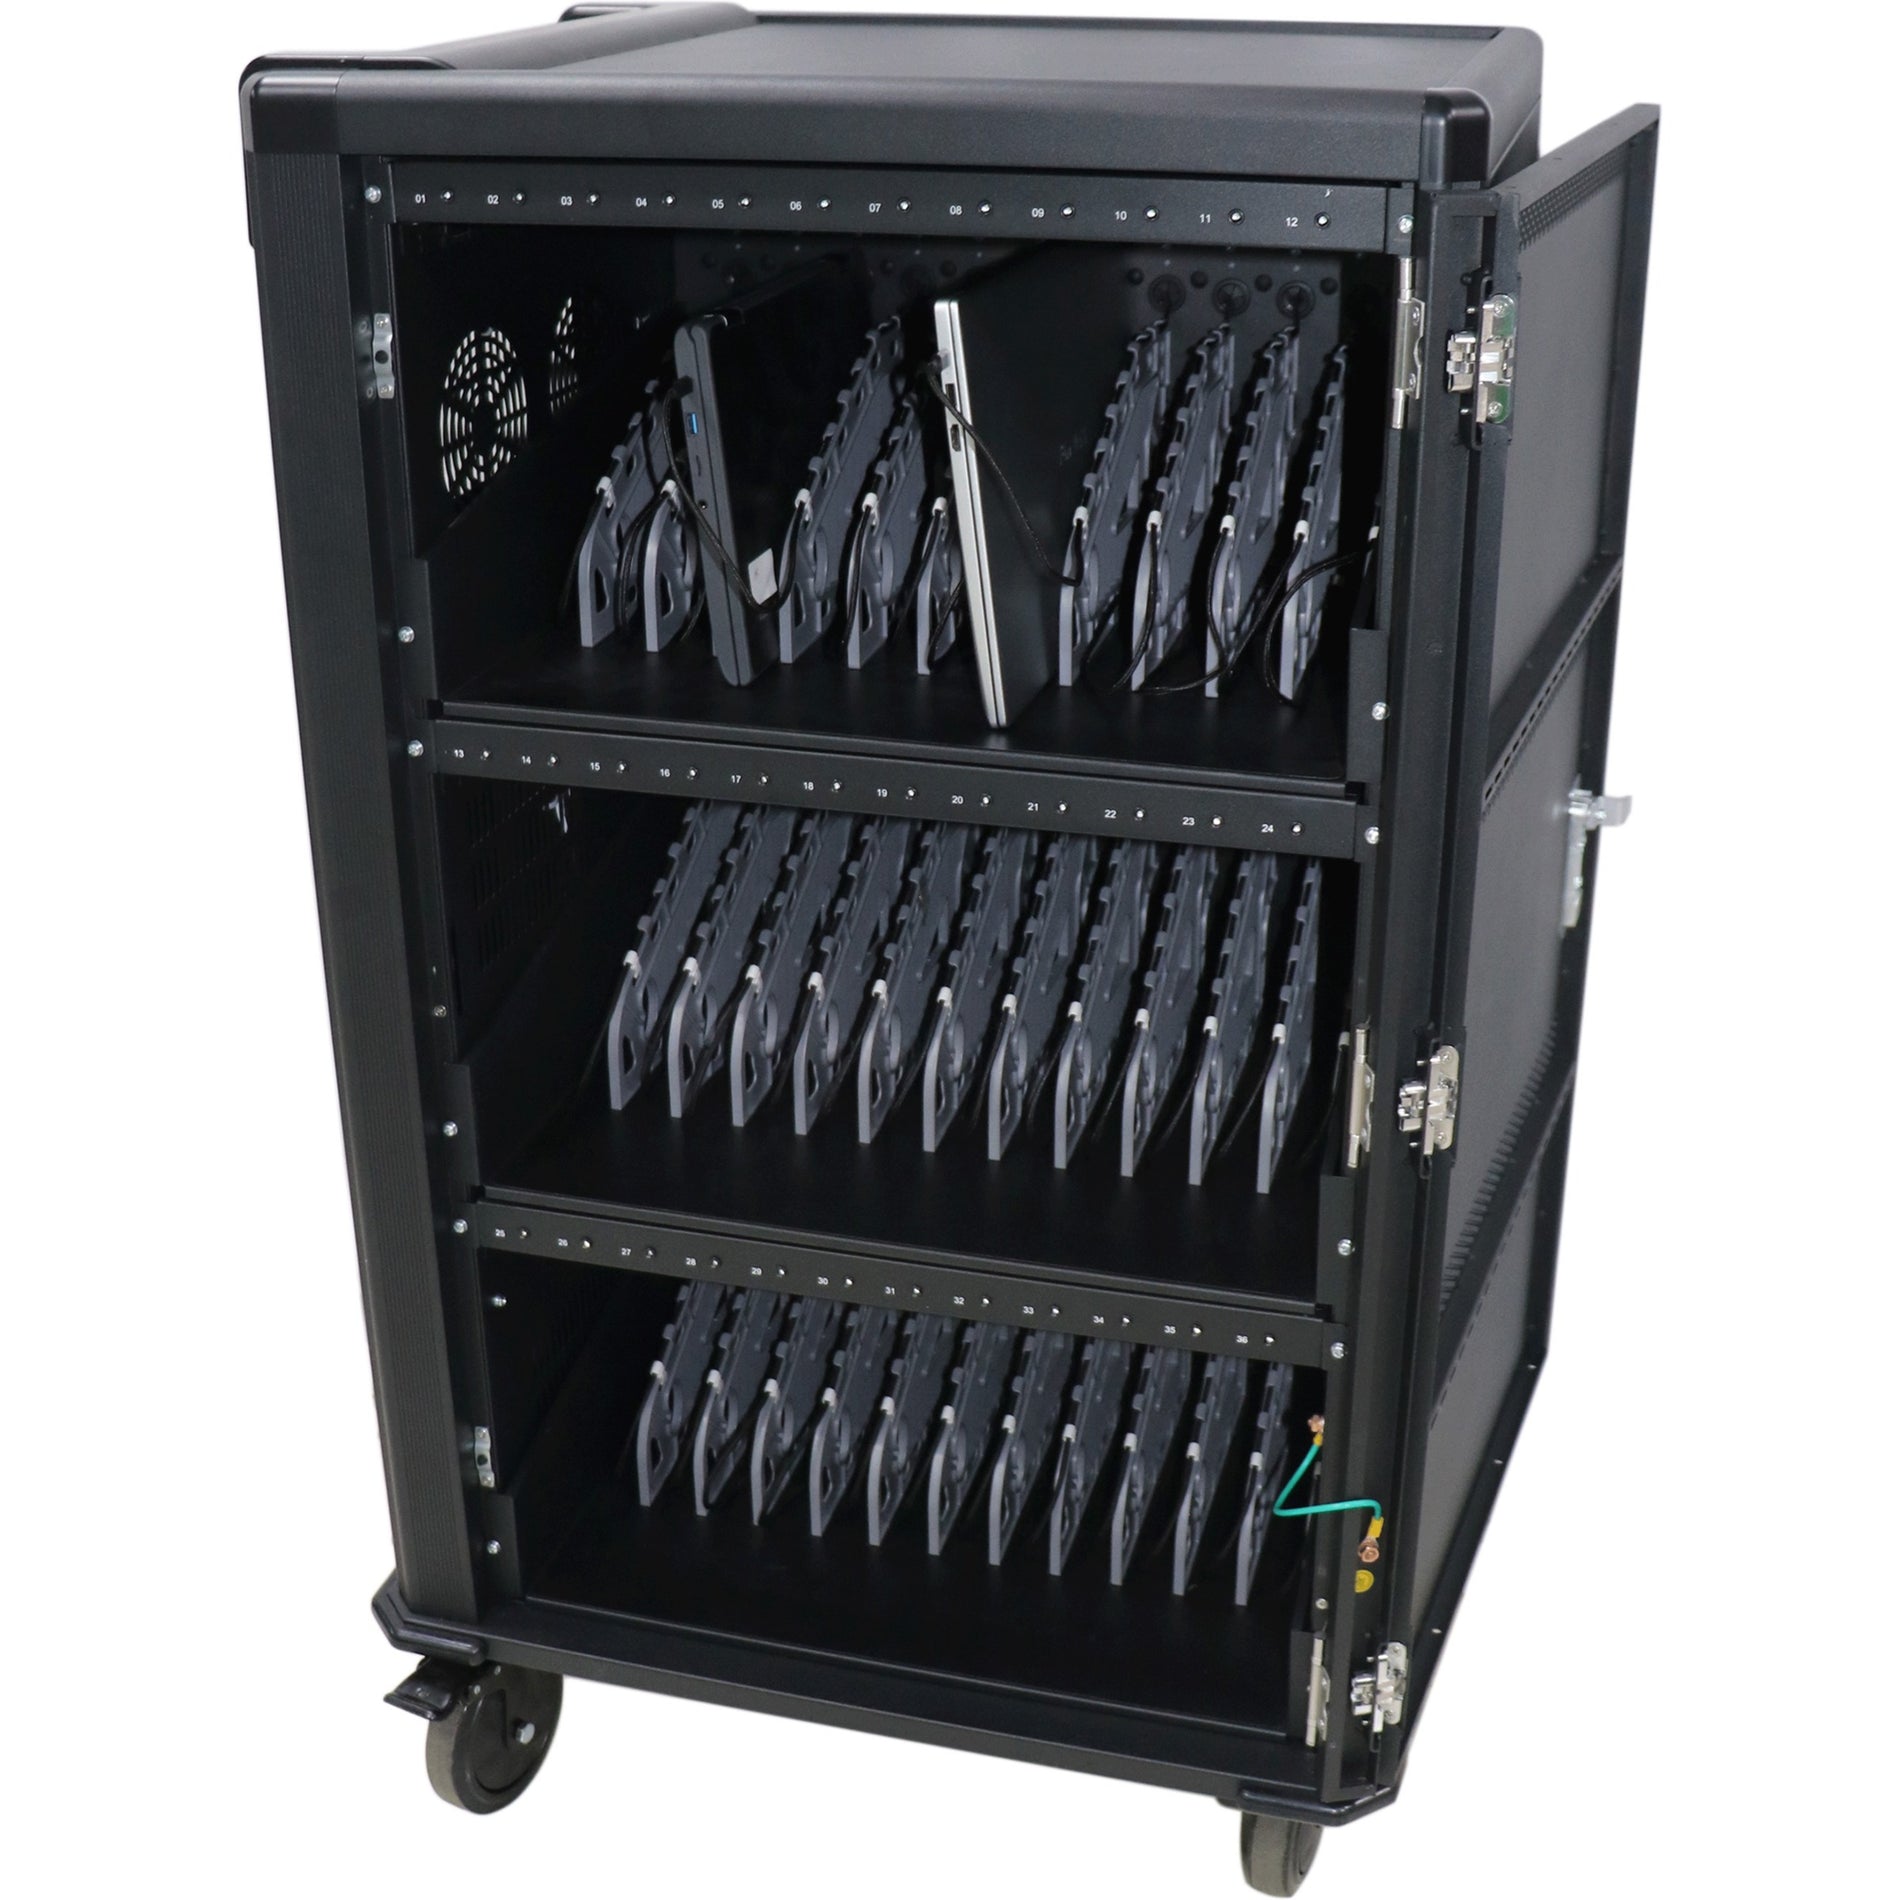 V7 CHGCT36USBCPD-1N Charge Carts - 36 Devices USB-C PD Prewired US Power, 5 Year Warranty, RoHS Certified